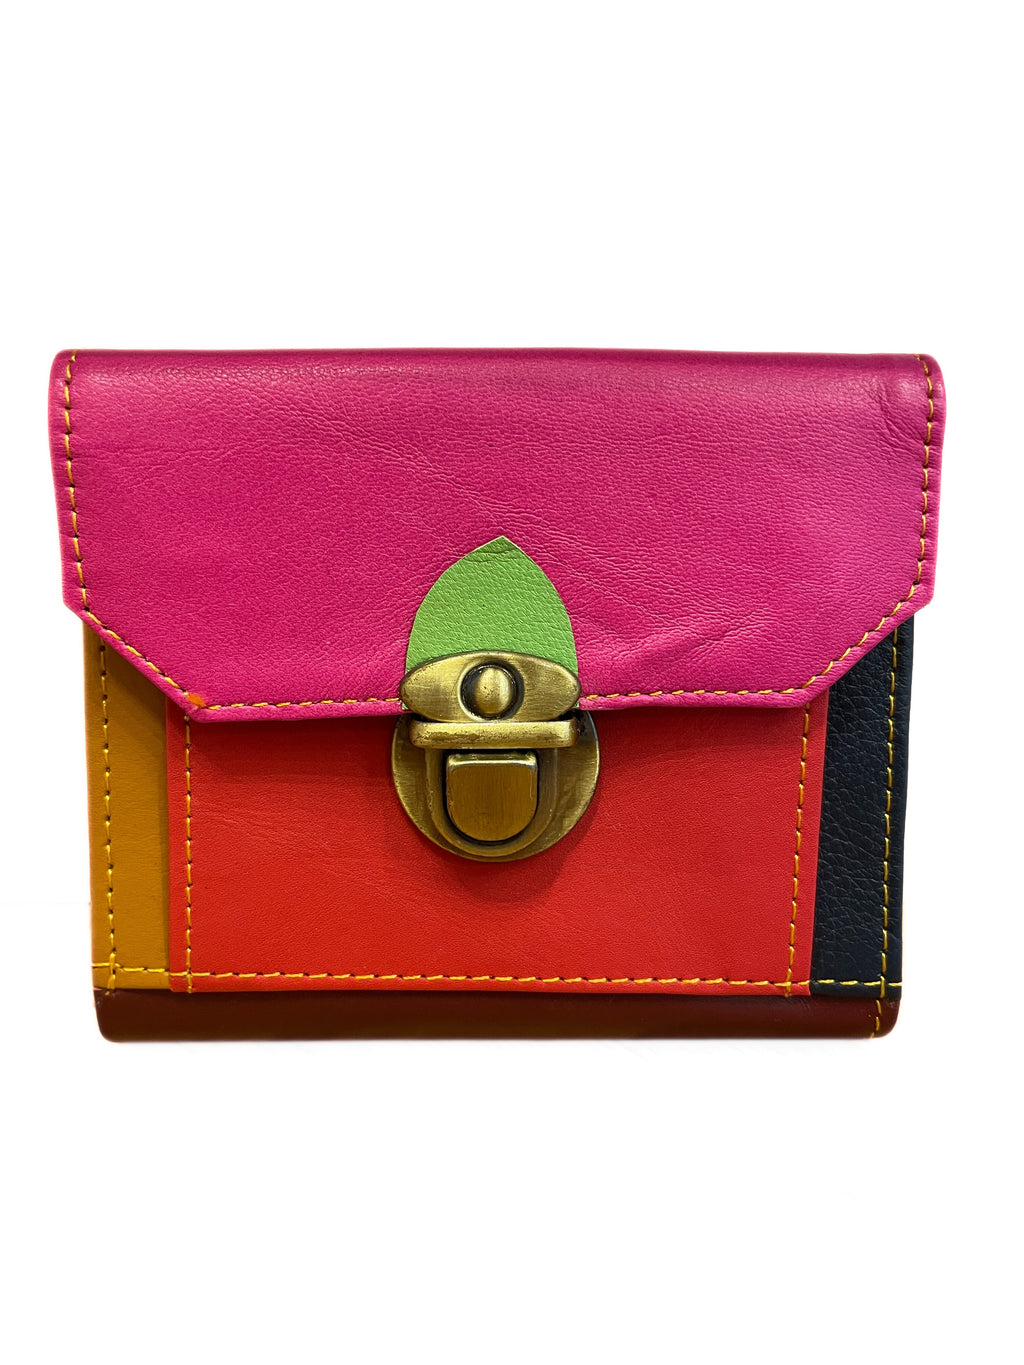 Cappelli Straworld Purse Colorful Hibiscus Flower w/Leather Handle-Very  Pretty! - NK Industries LTD